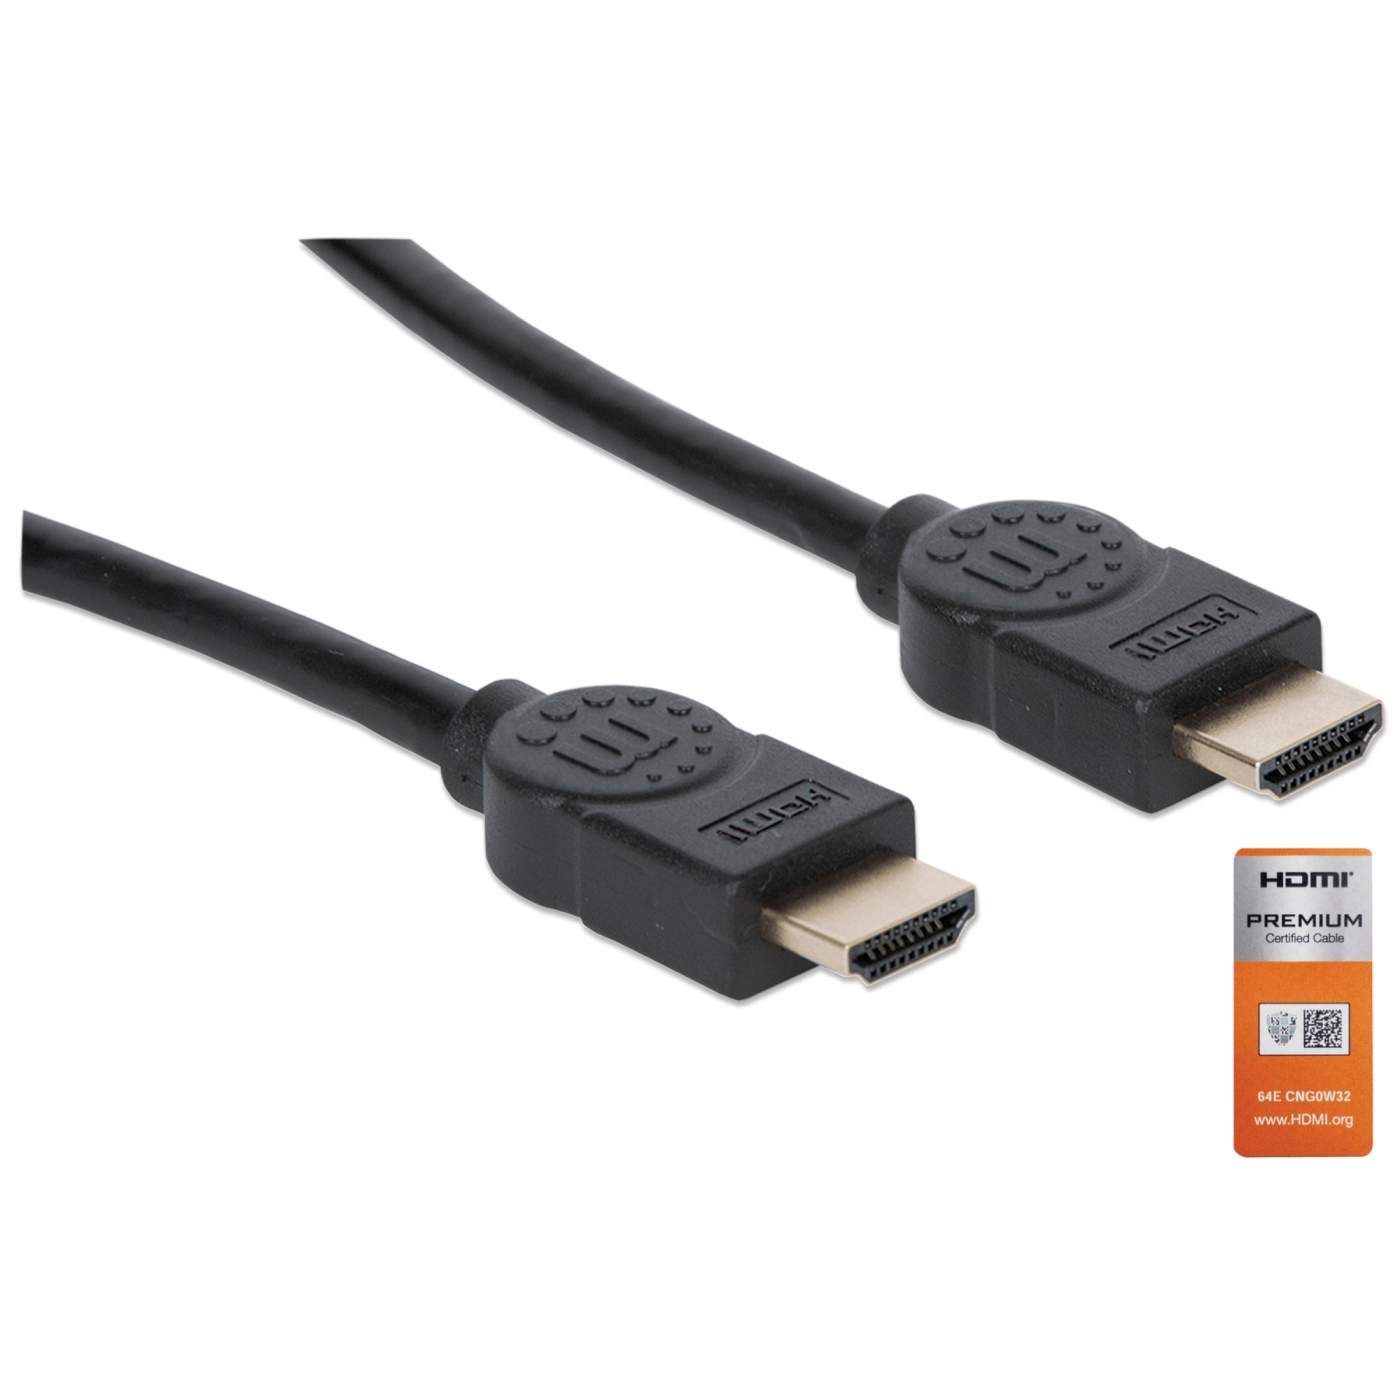 5m HDMI 2.0 High Speed Cable with Ethernet Channel. 4K @60Hz